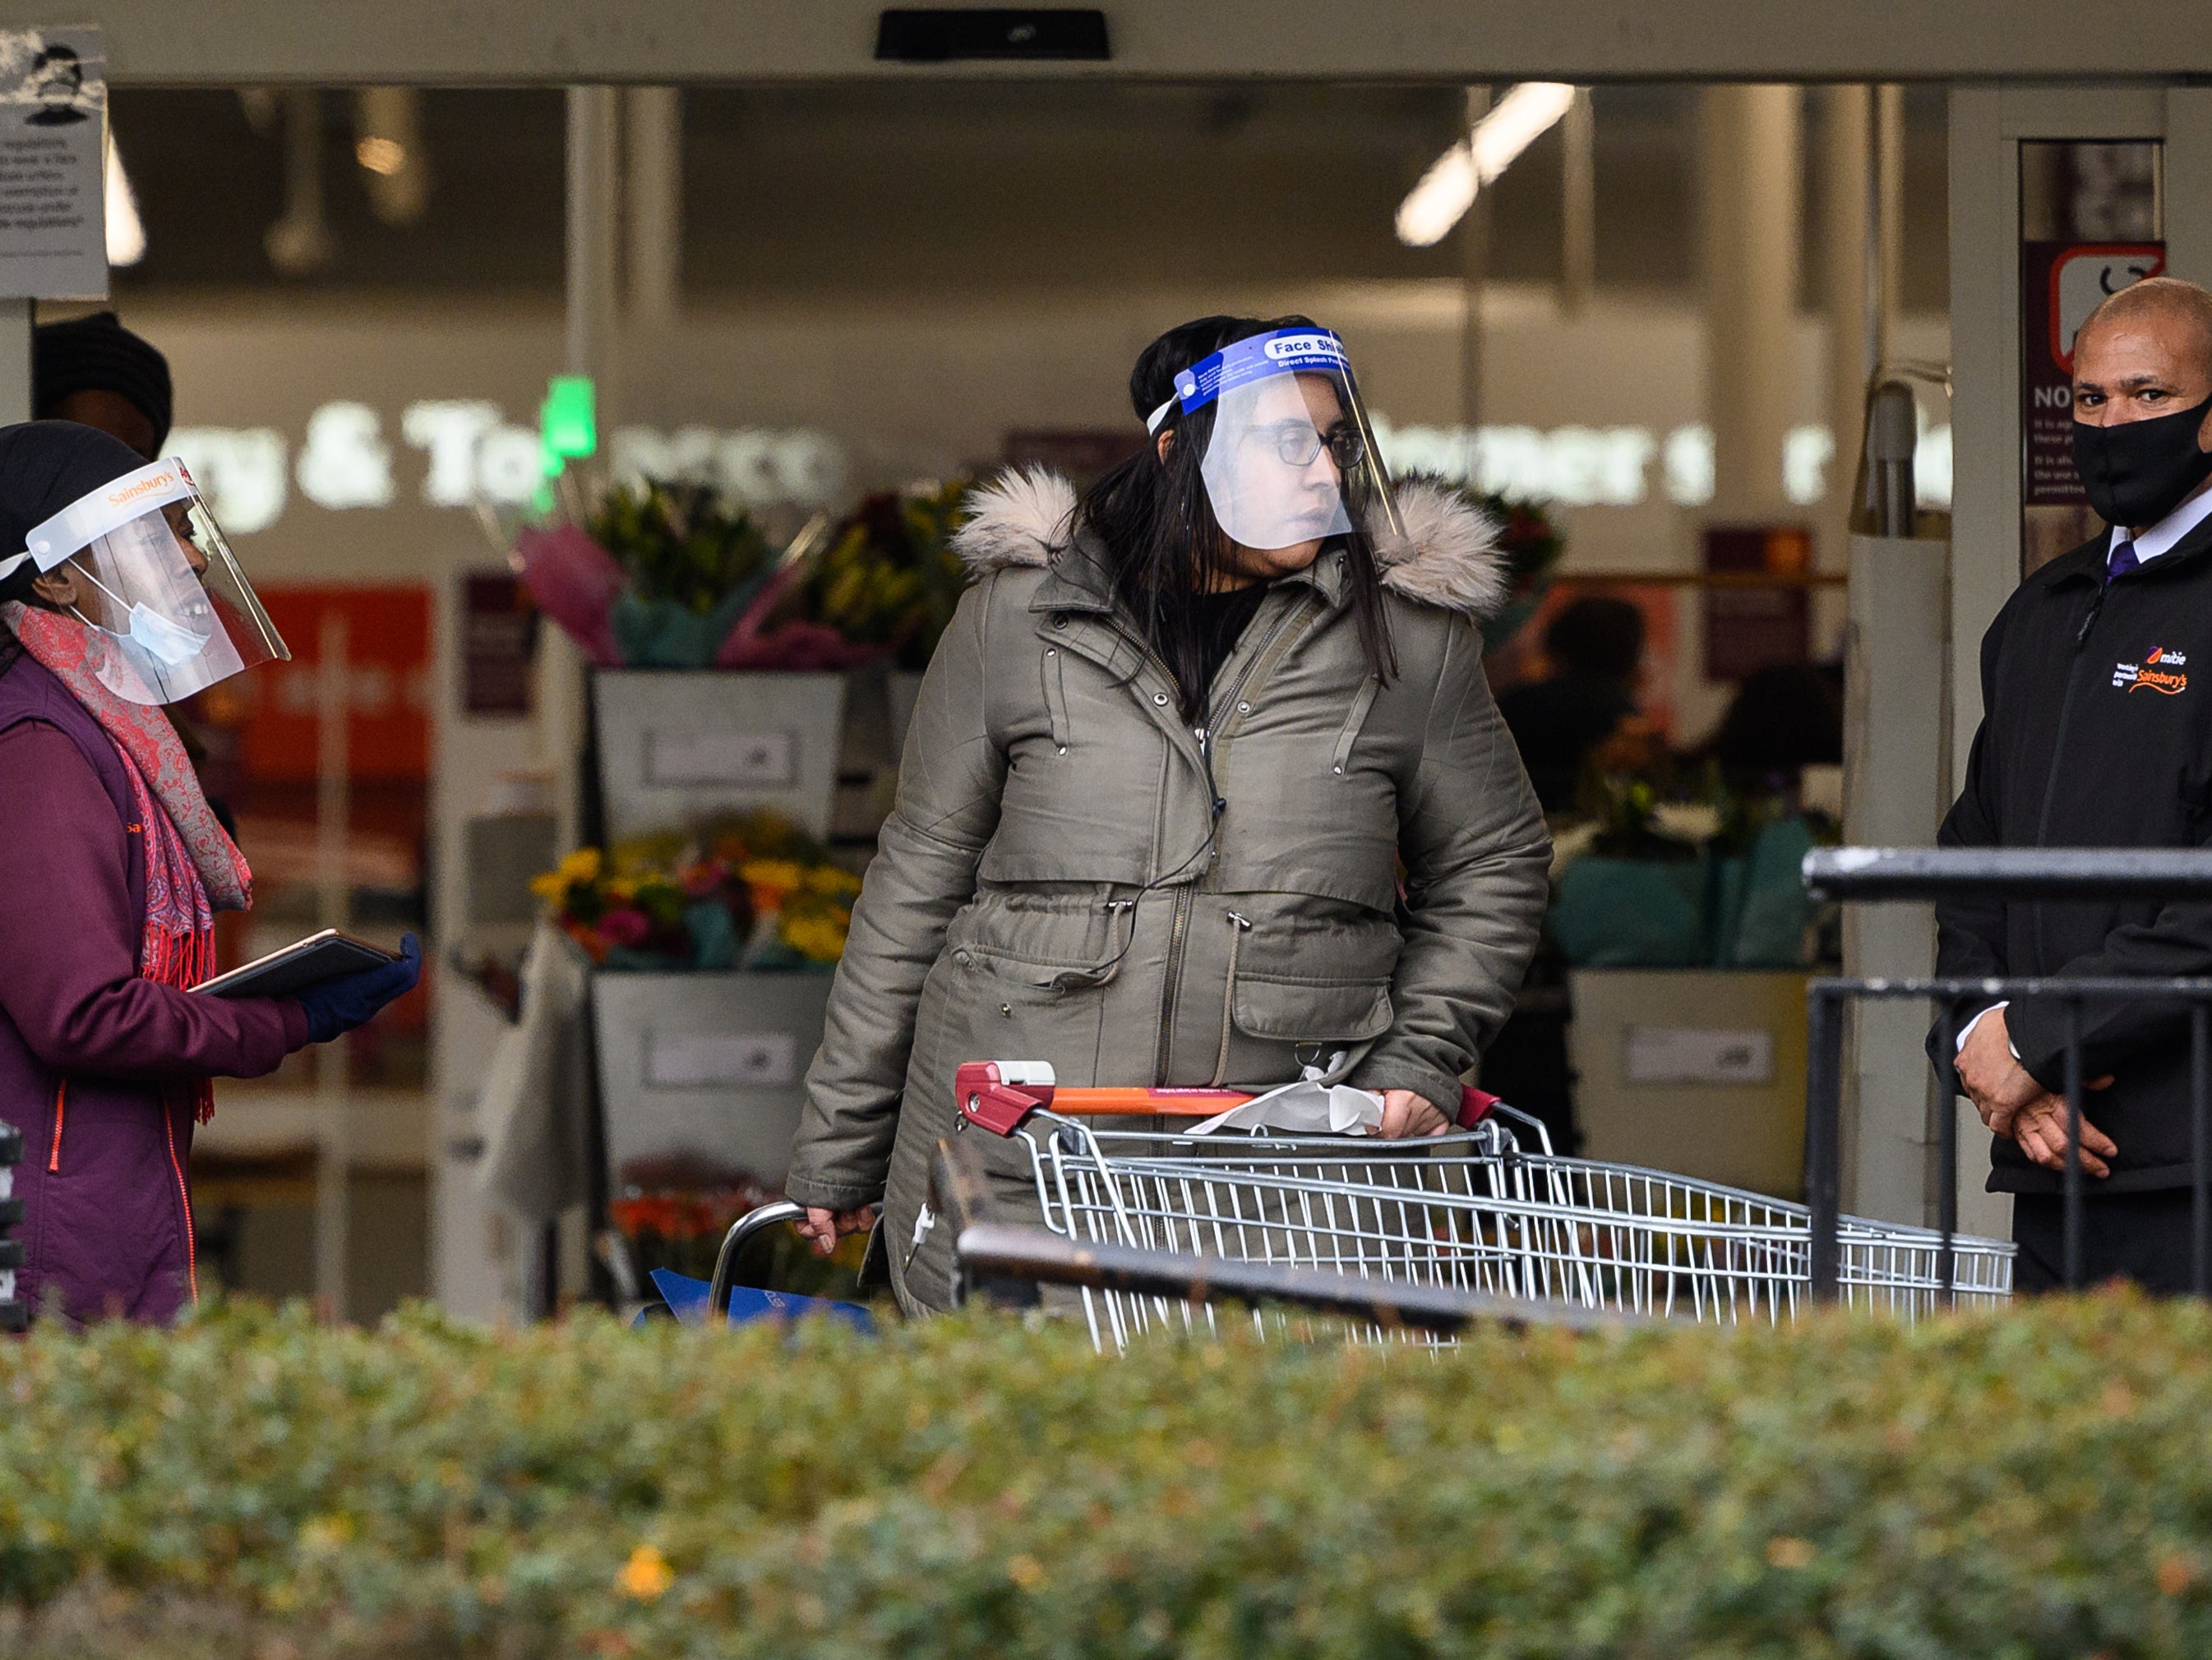 A security guard assists a member of the store team as they stand at the entrance to a branch of Sainsbury’s following the company’s decision to enforce the mandatory wearing of face masks